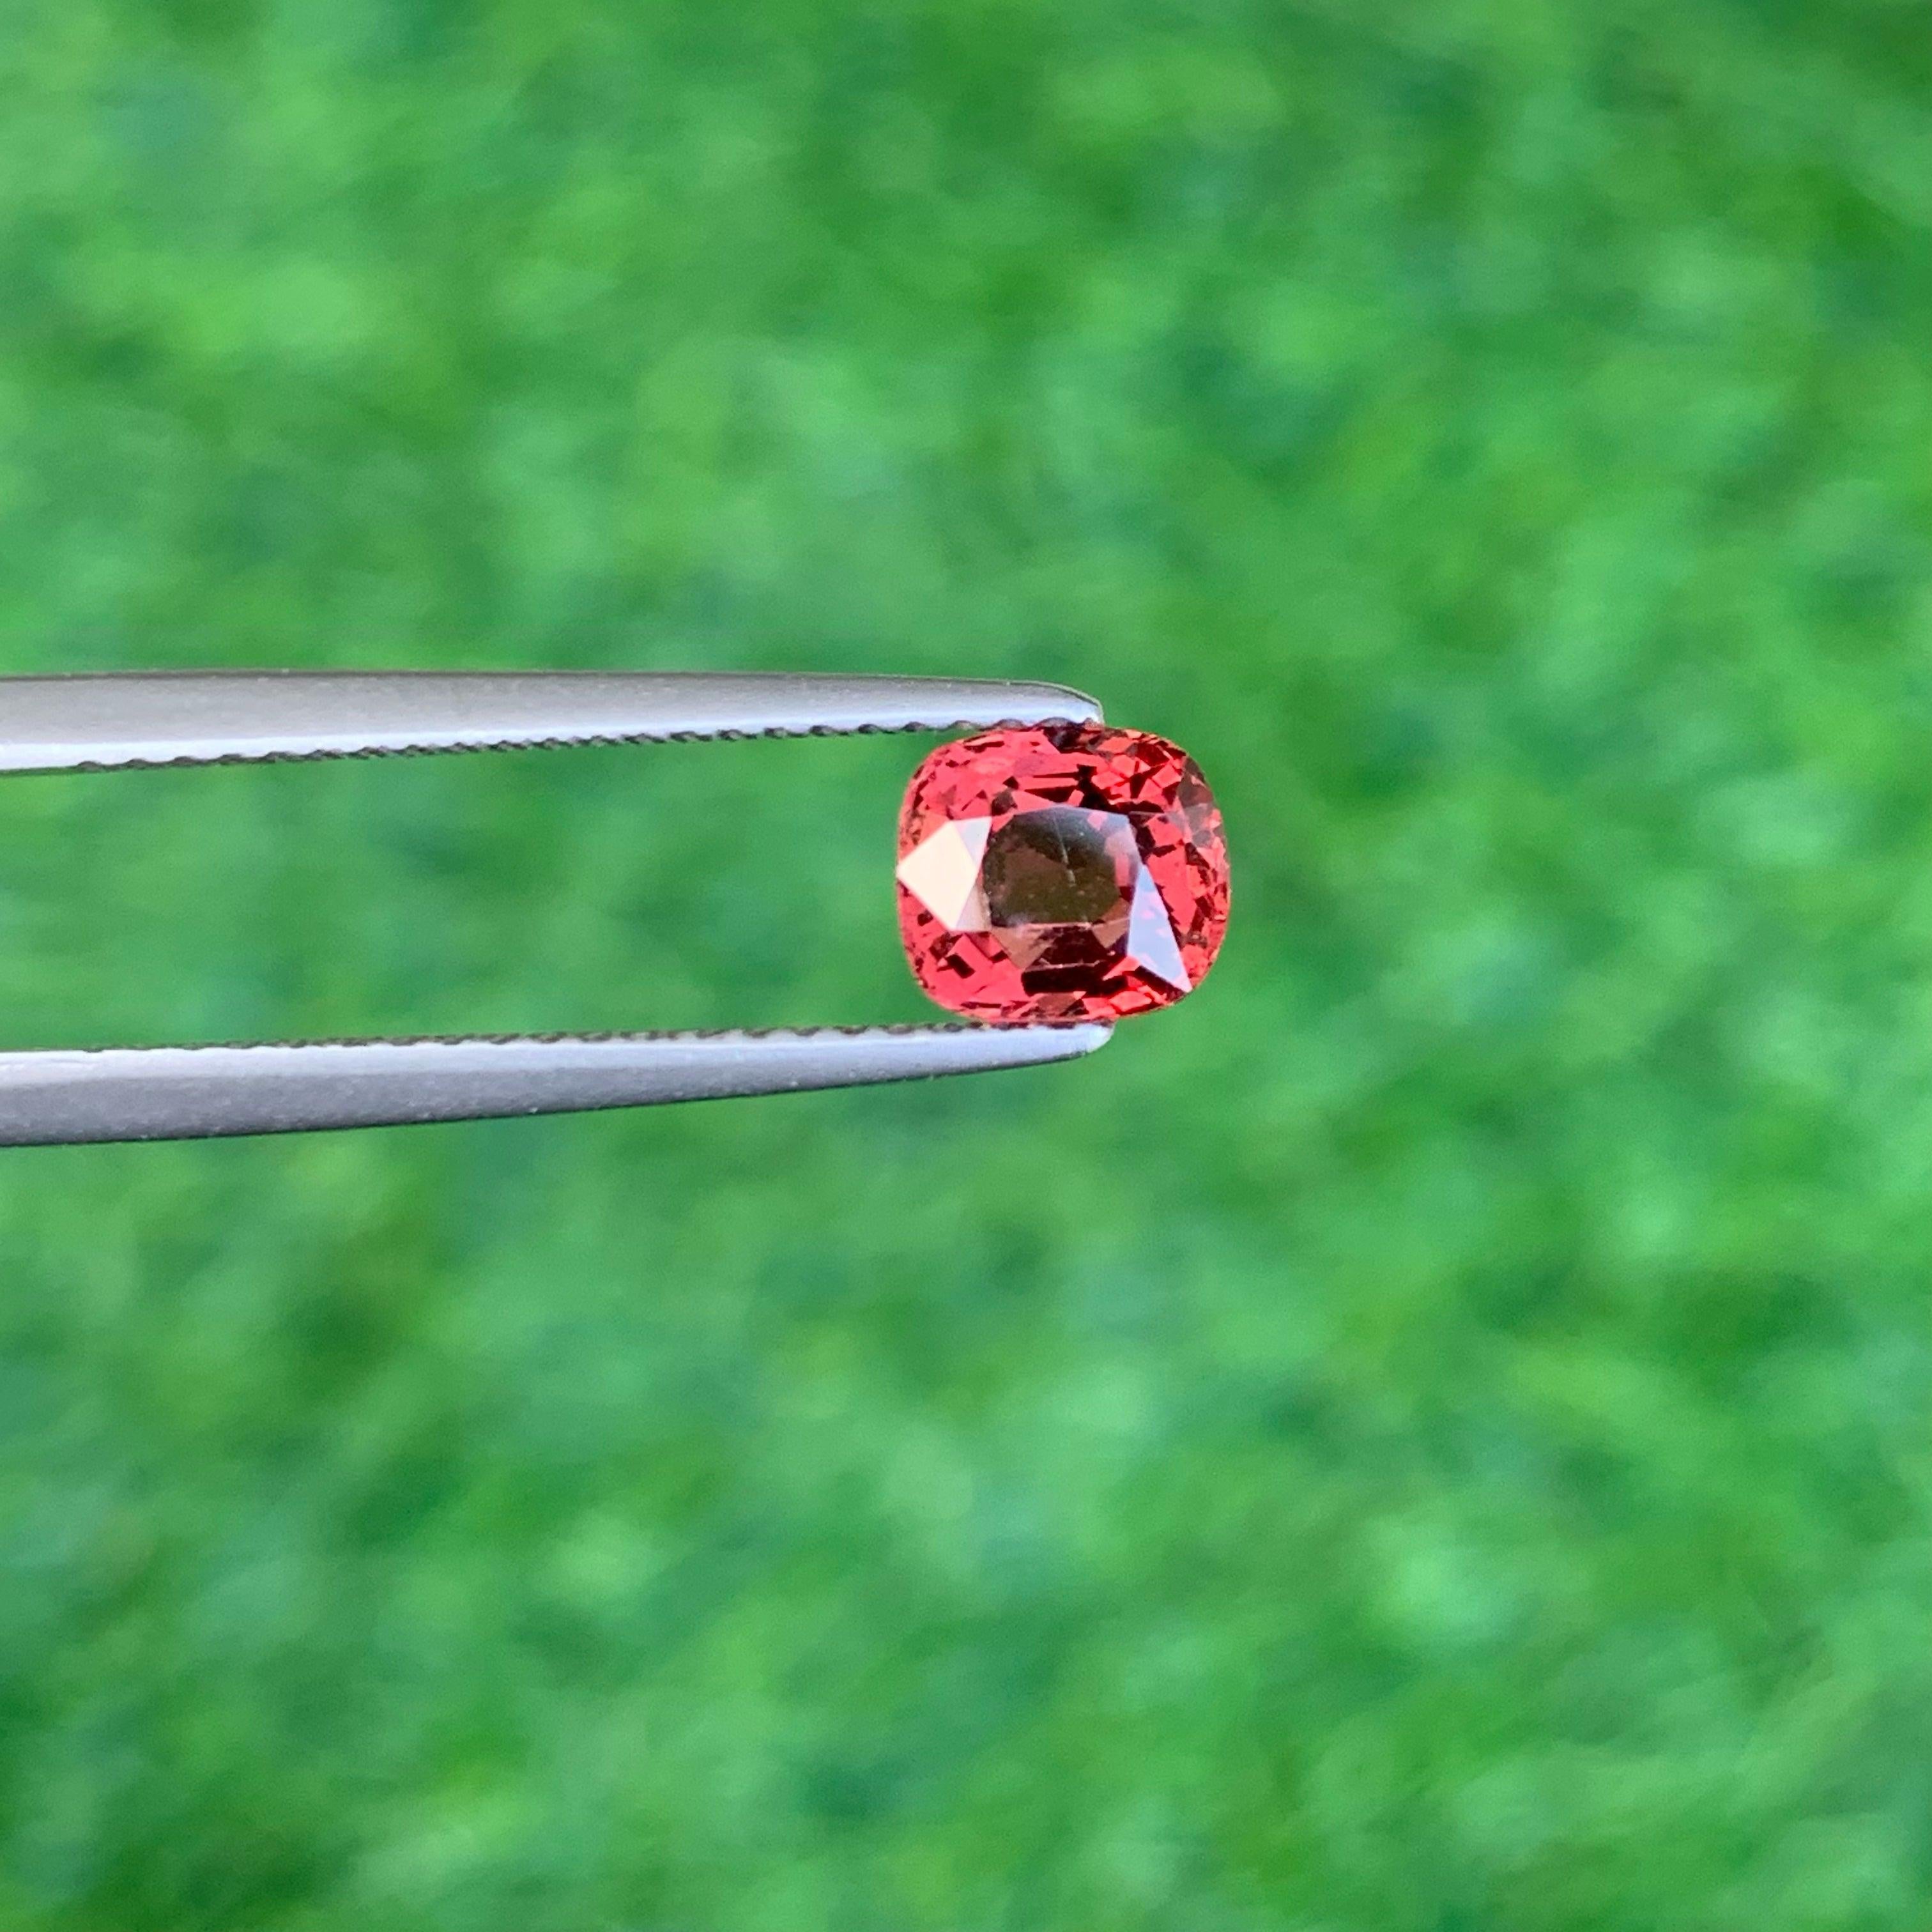 Cushion Cut Majestic Orange Red Spinal Cut Gemstone 1.15 Carats AIG Certified Spinel Stone For Sale